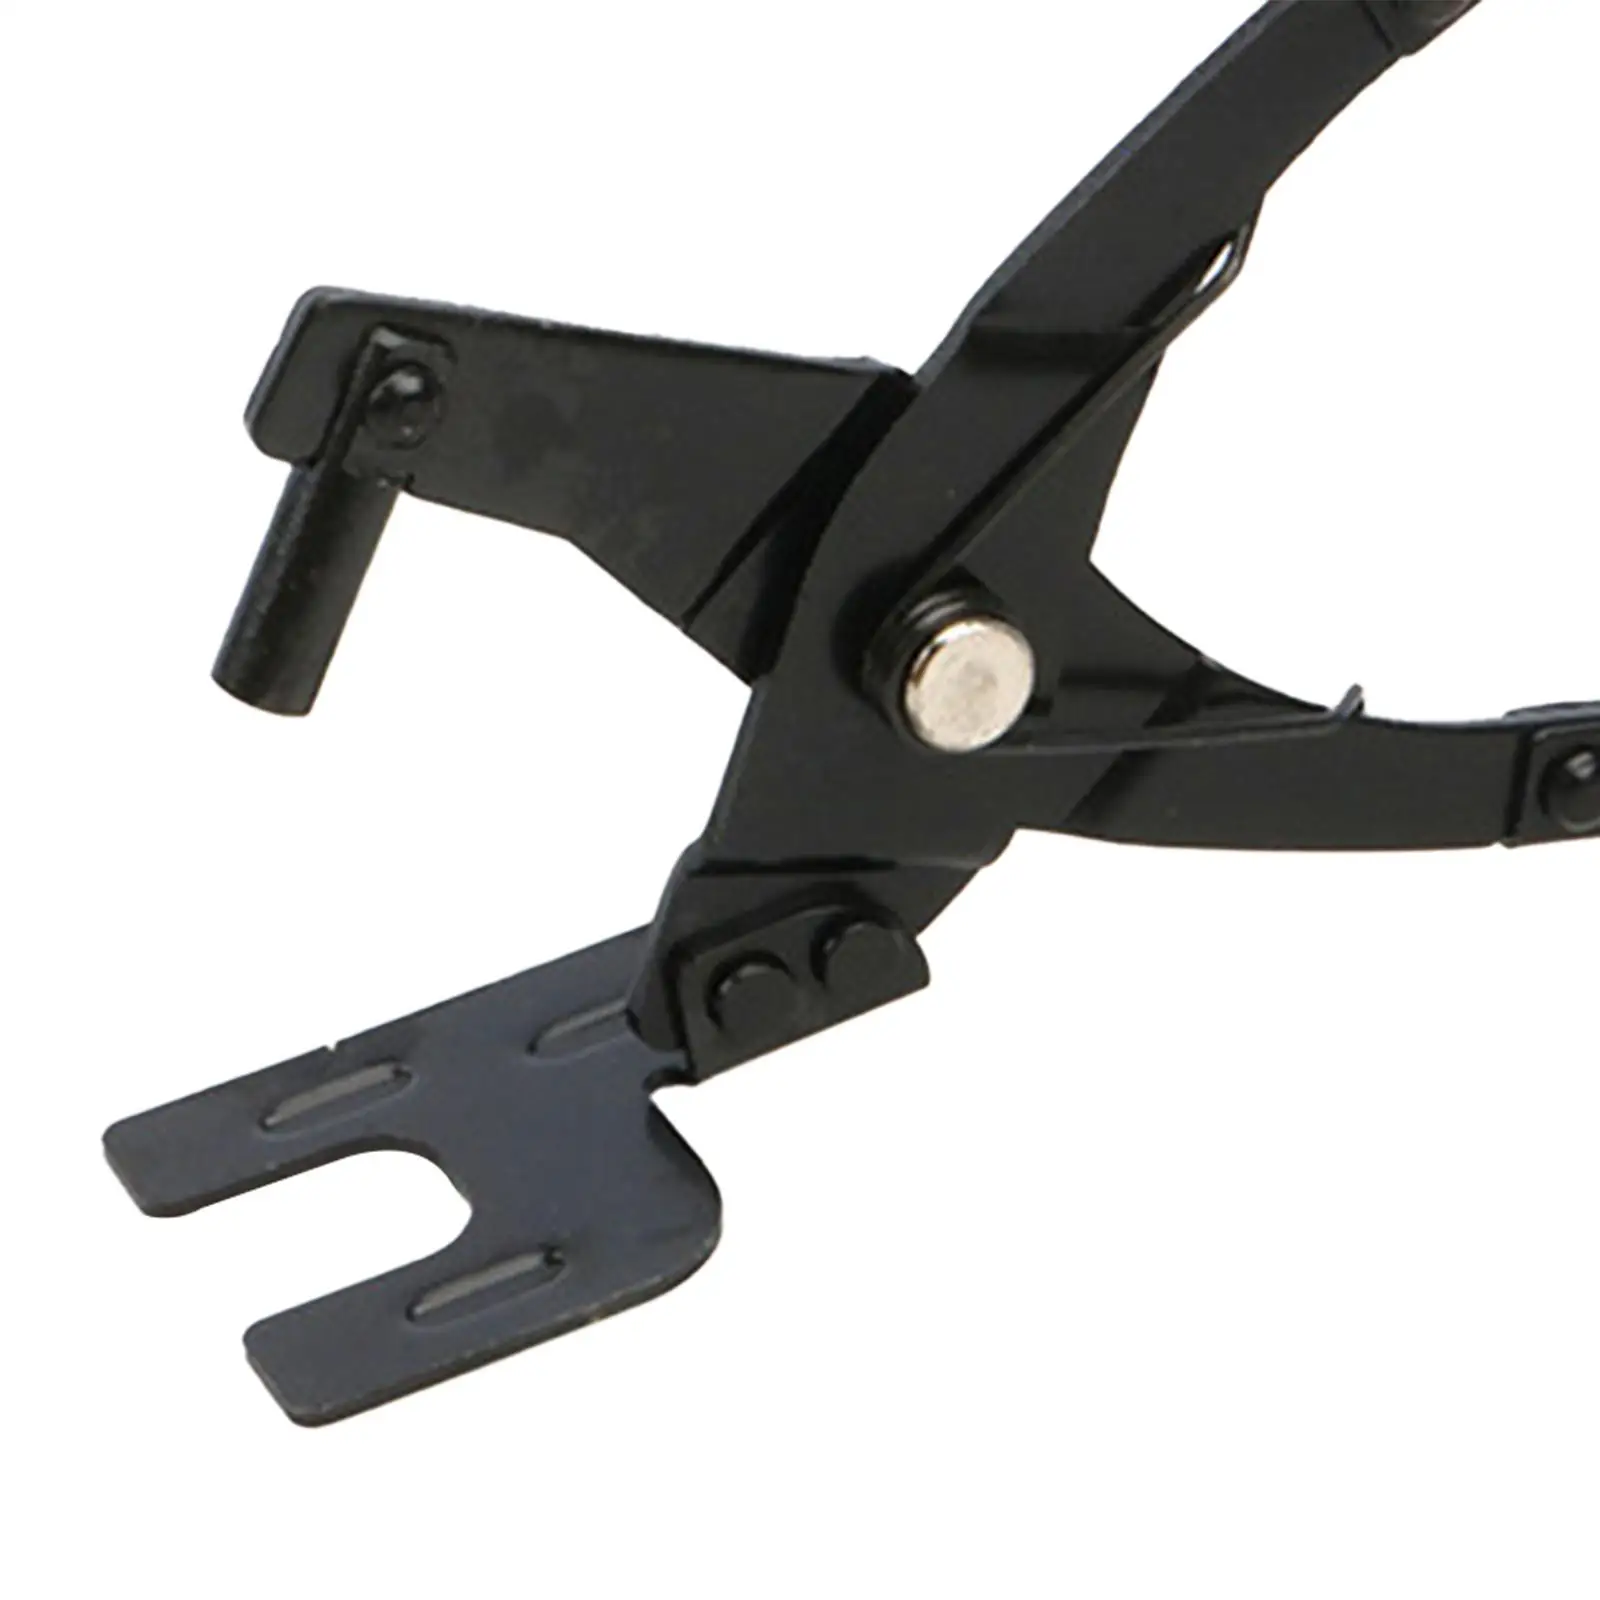 Car Exhaust Hanger Removal Pliers Separates Rubber Supports from Exhaust Hanger